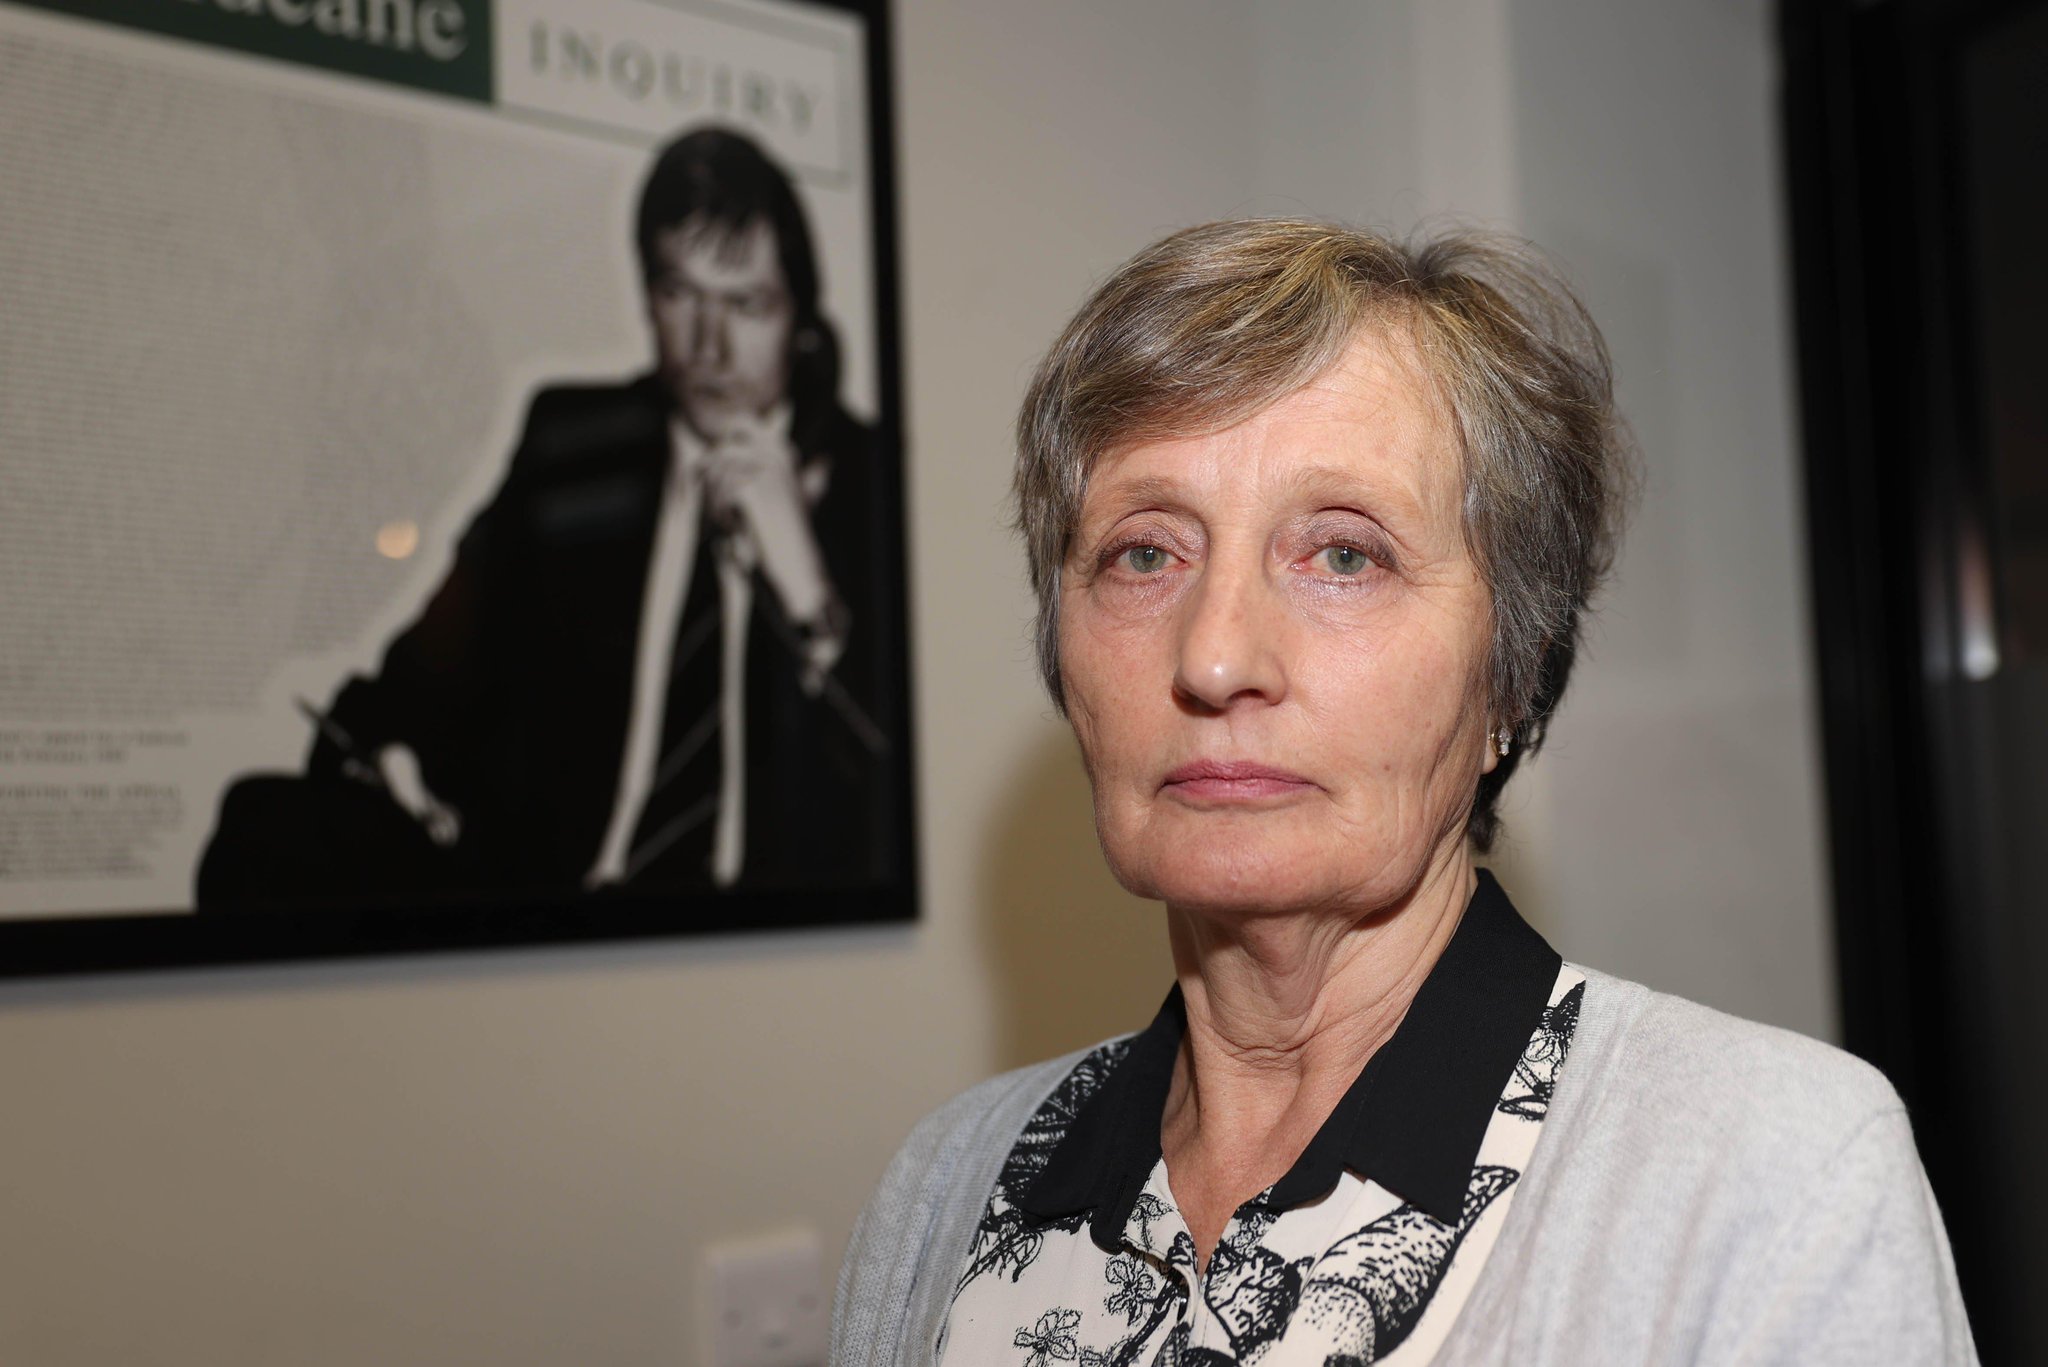 Pat Finucane murder: Long-delayed legal action by Geraldine Finucane against UK Government to go ahead in June